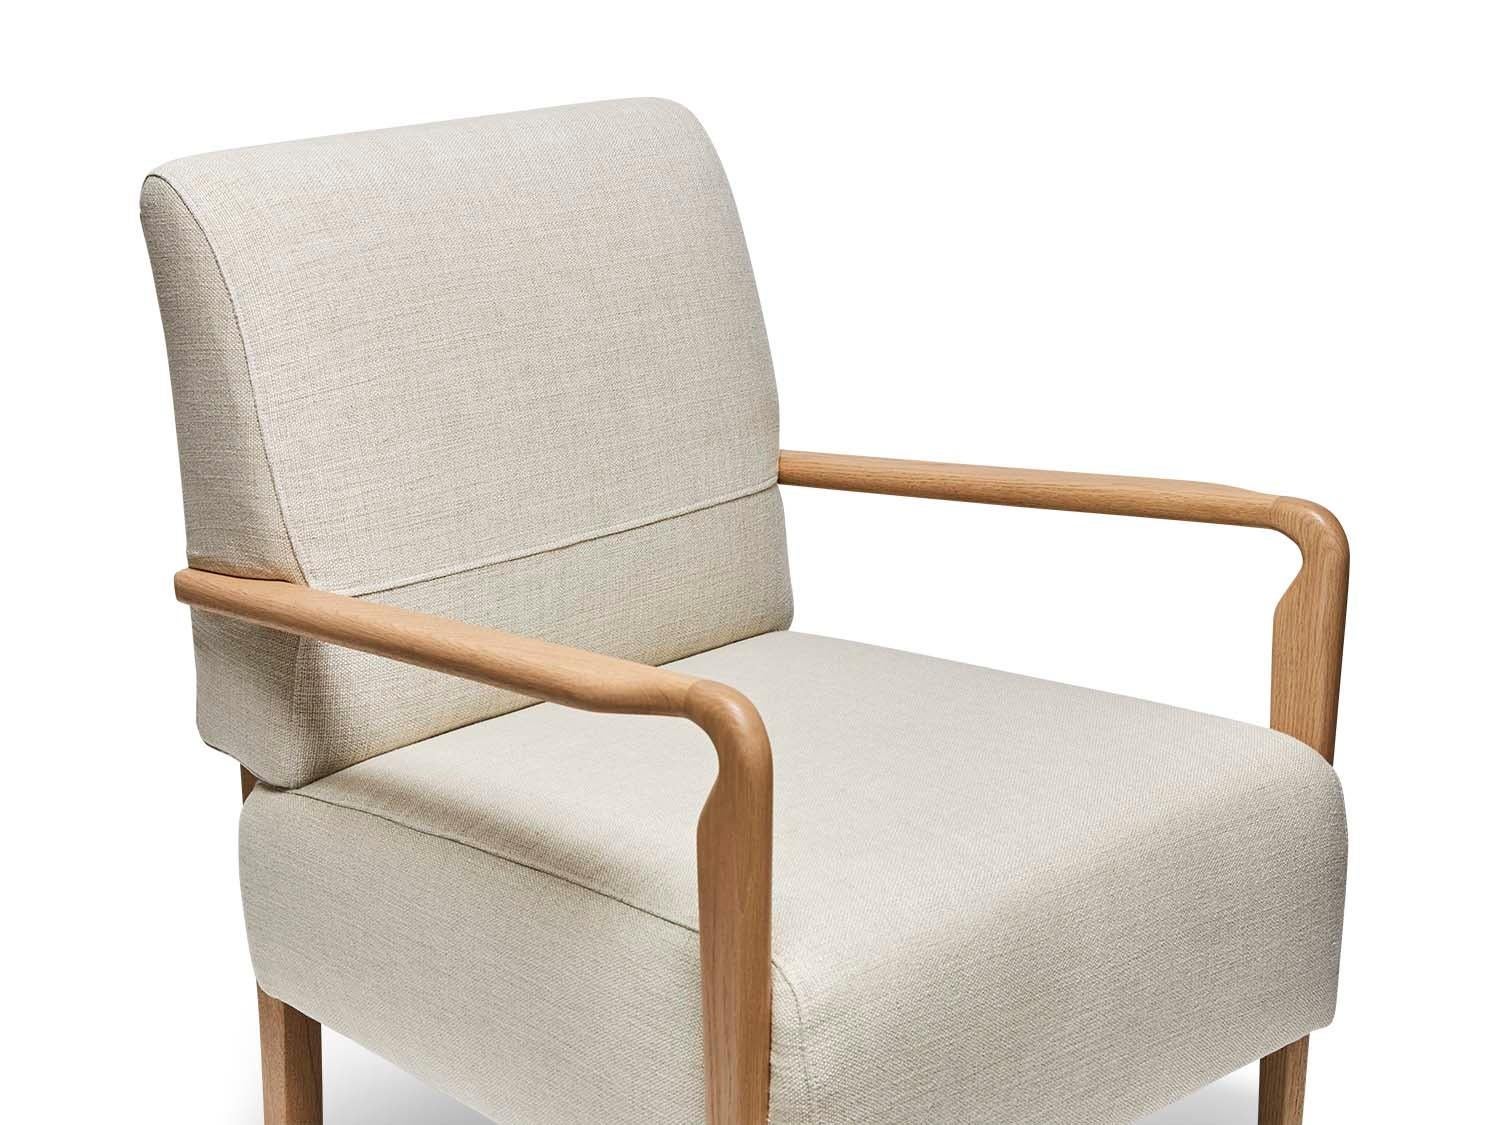 Mid-Century Modern Oak and Linen Niguel Lounge Chair by Lawson-Fenning